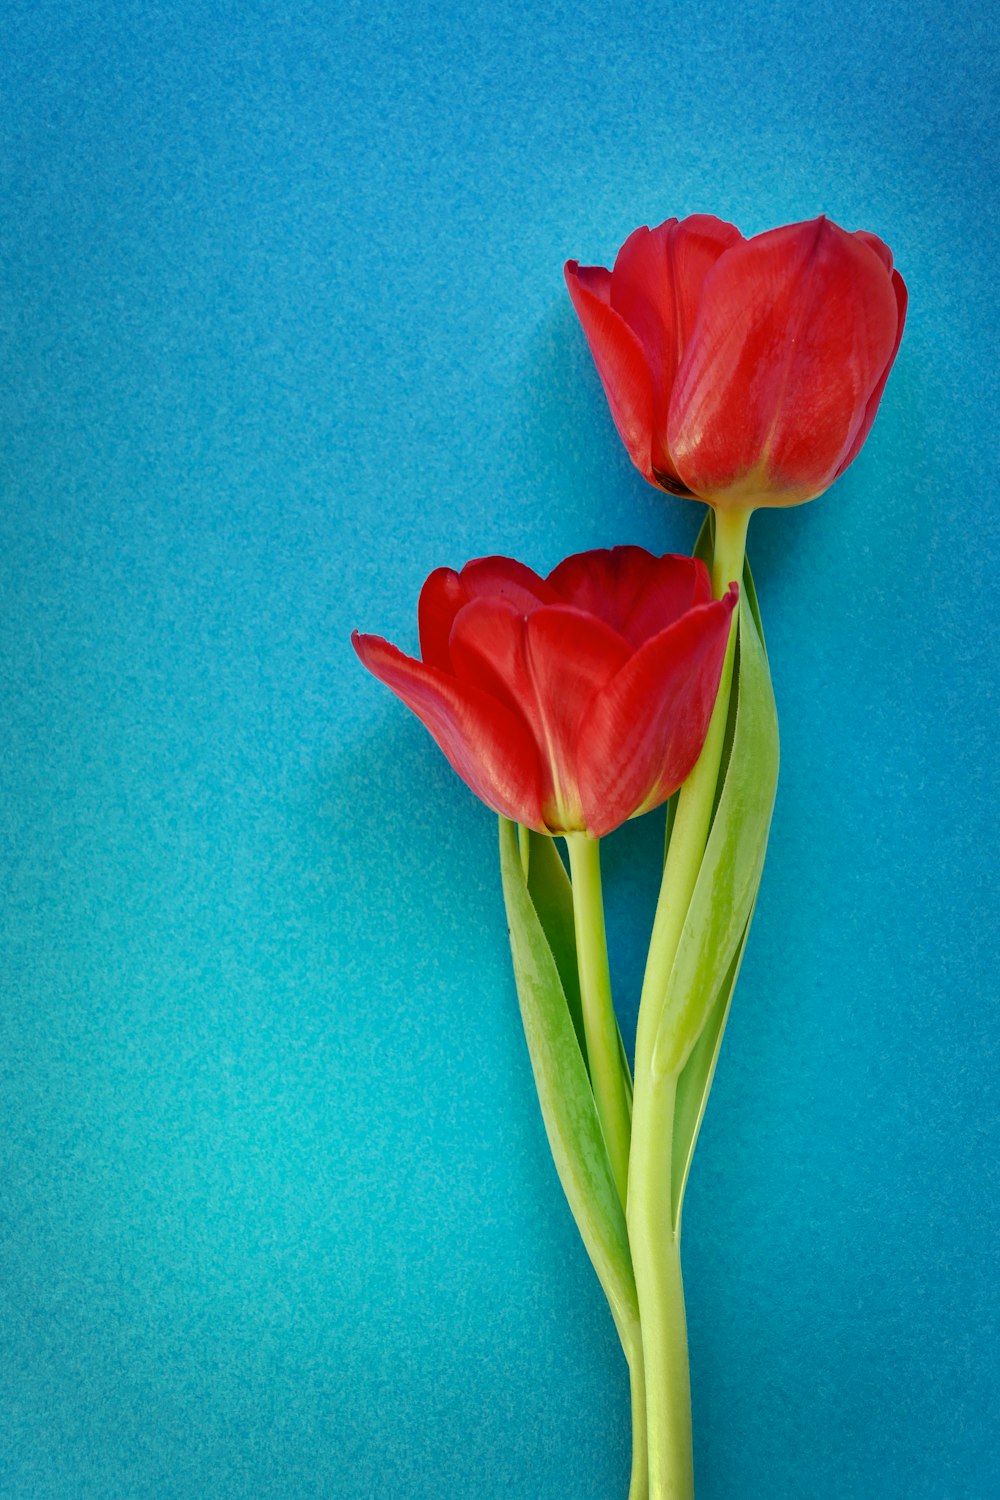 two red flowers on a blue background